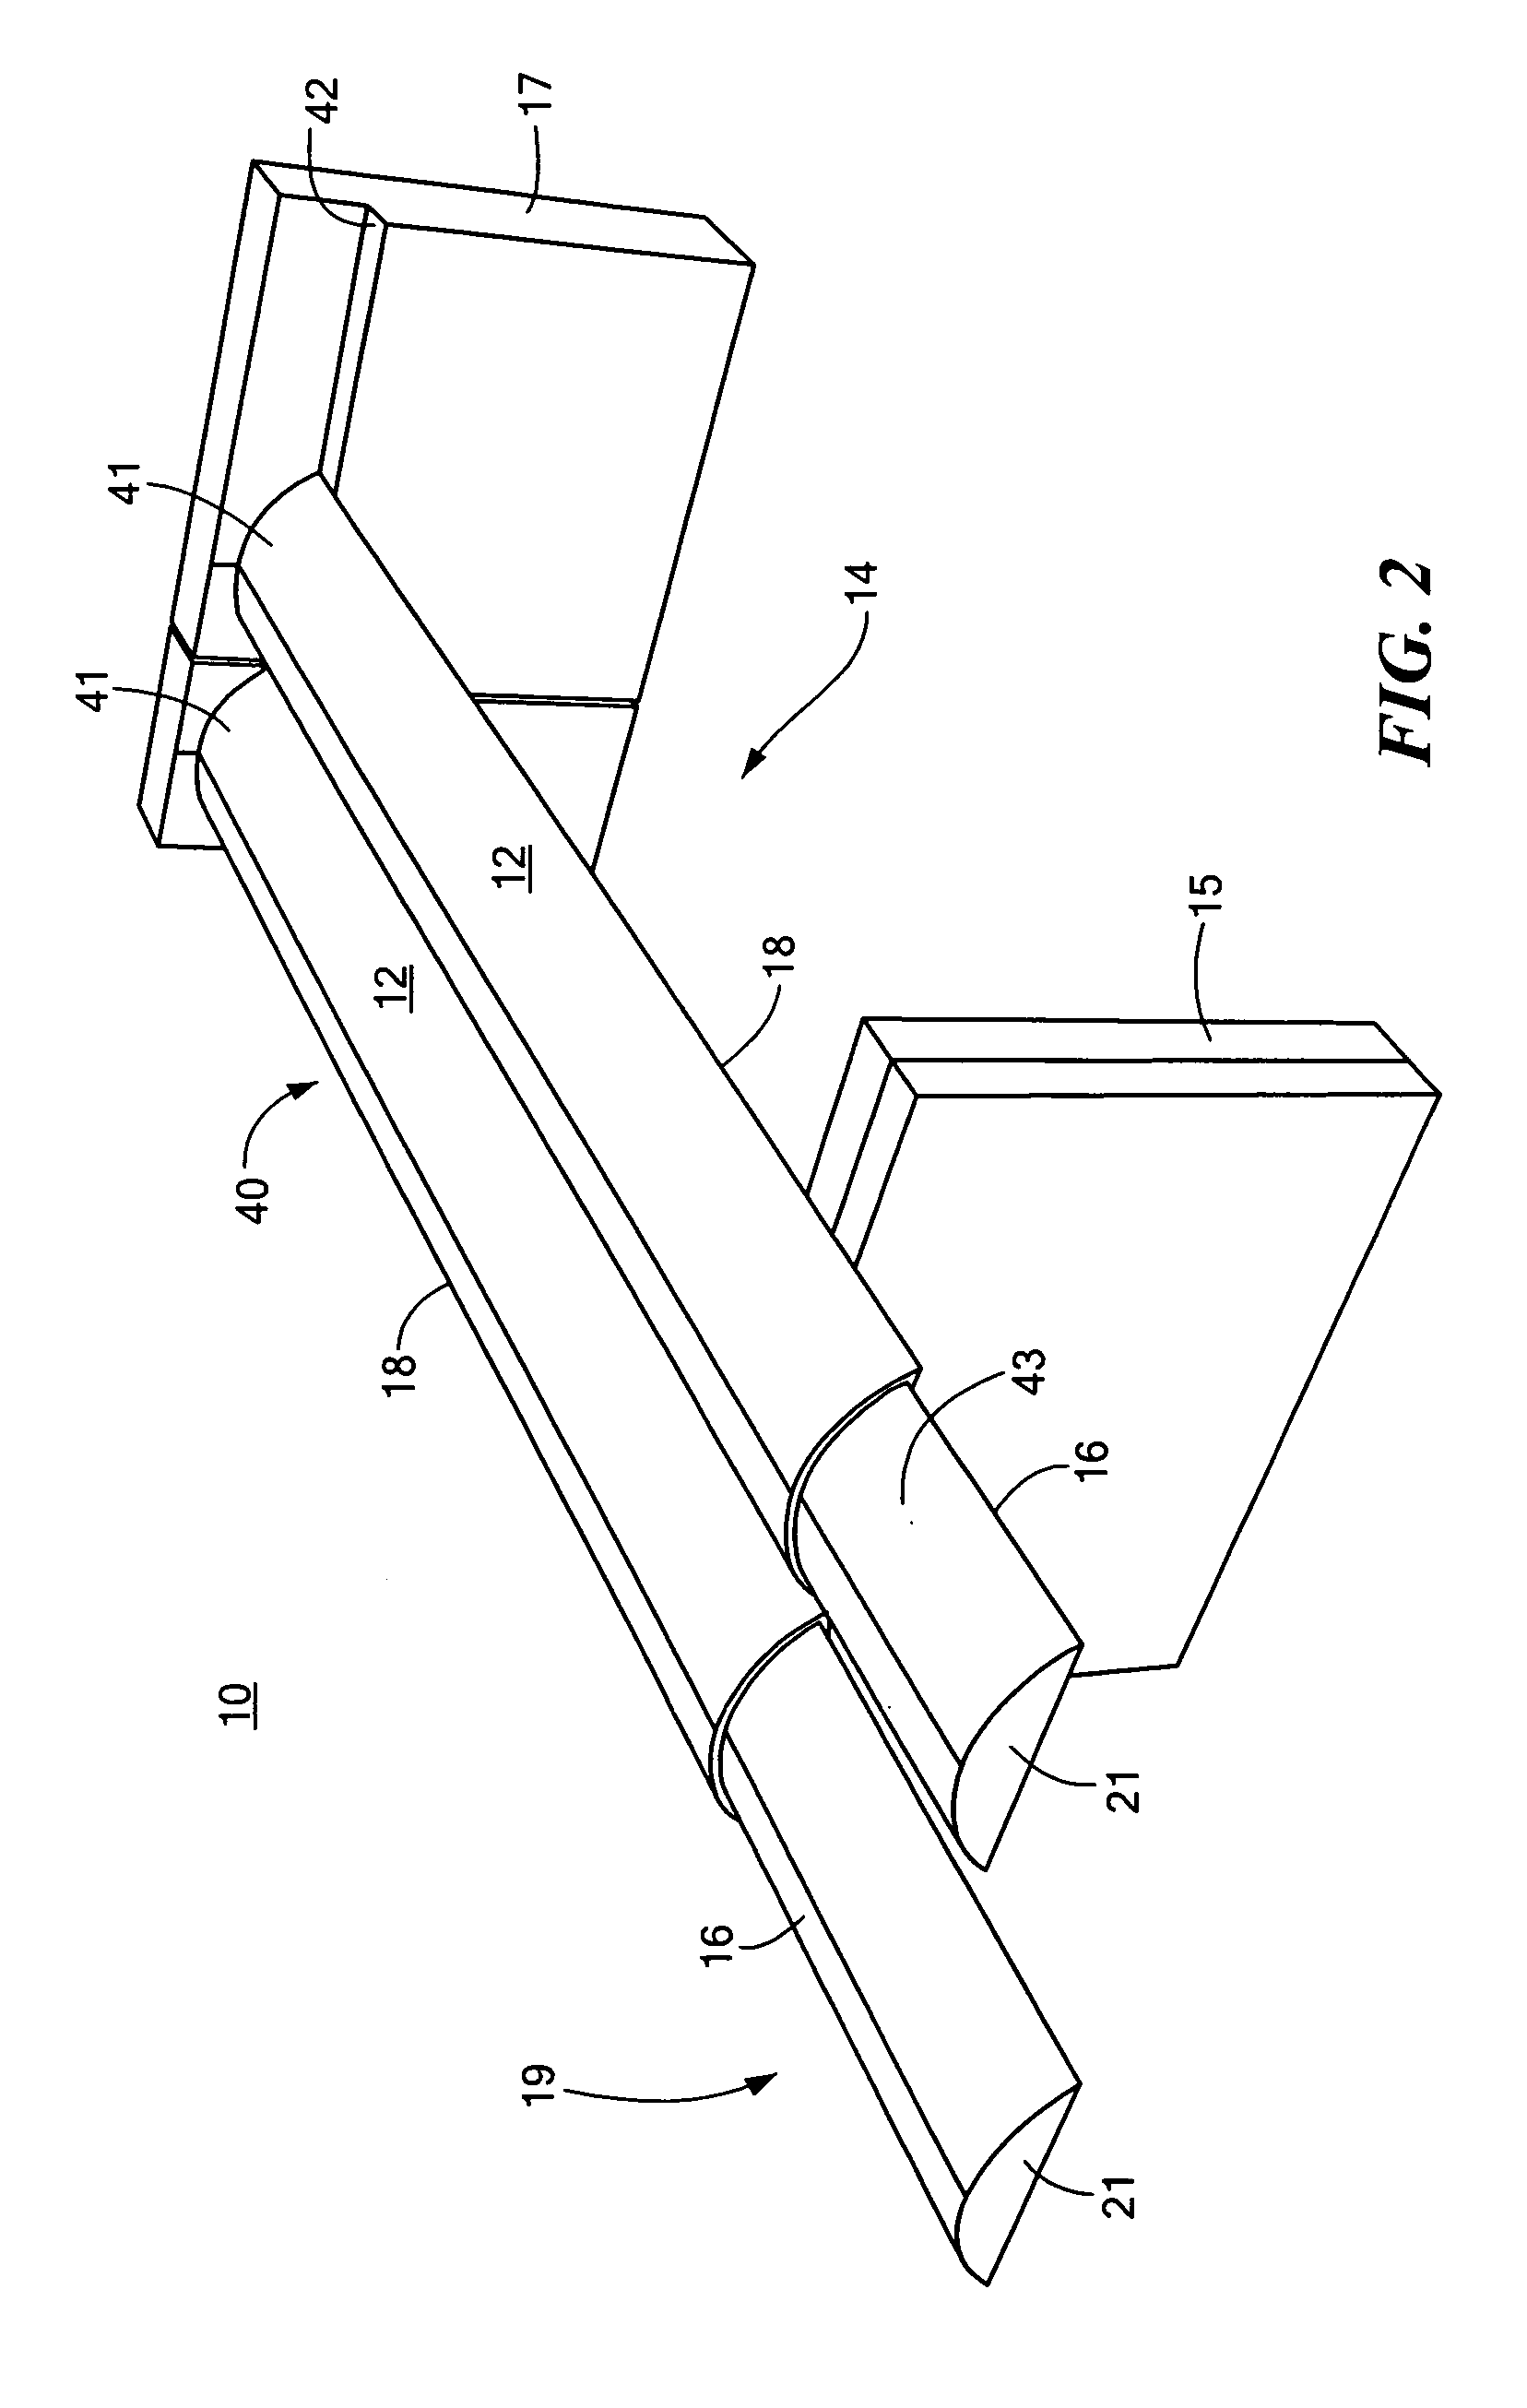 System and method for construction of a floor slab and a roof slab